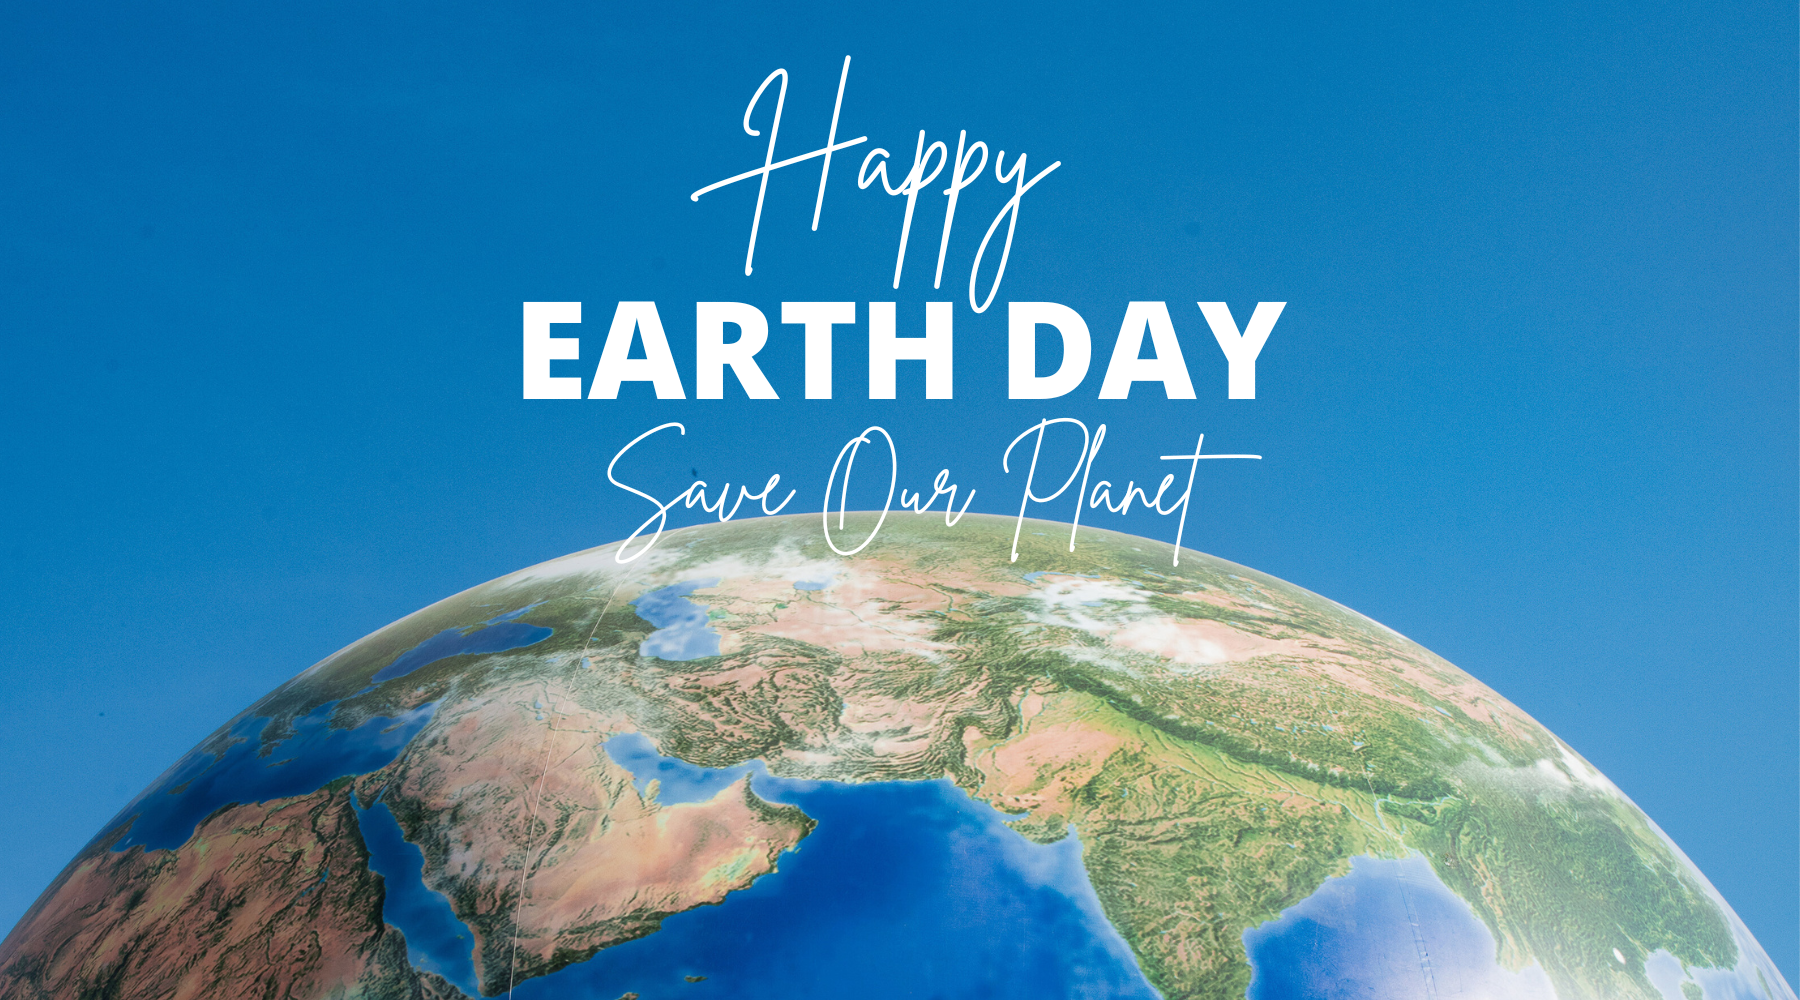 Earth Day Special: April 15th - April 24th